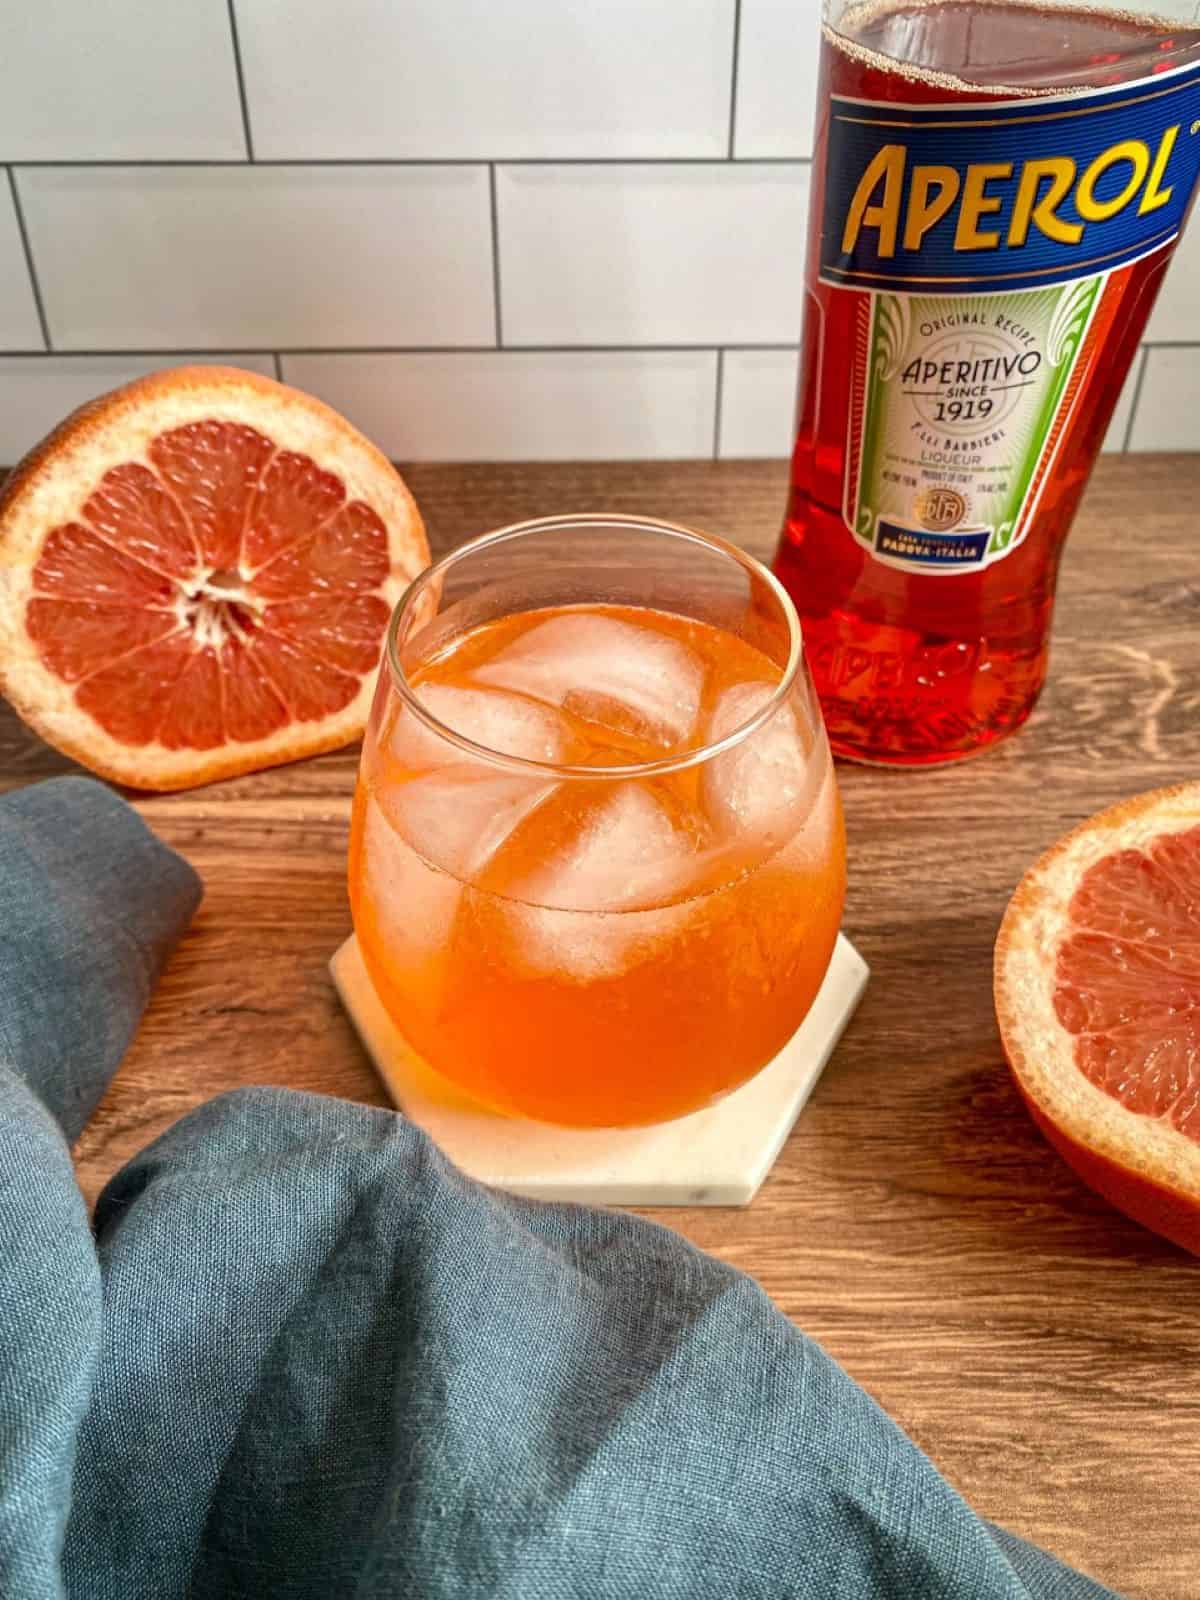 A glass of an orange colored cocktail with gin and aperol. A bottle of aperol and a sliced grapefruit are on the side of the cocktail with a blue cloth.